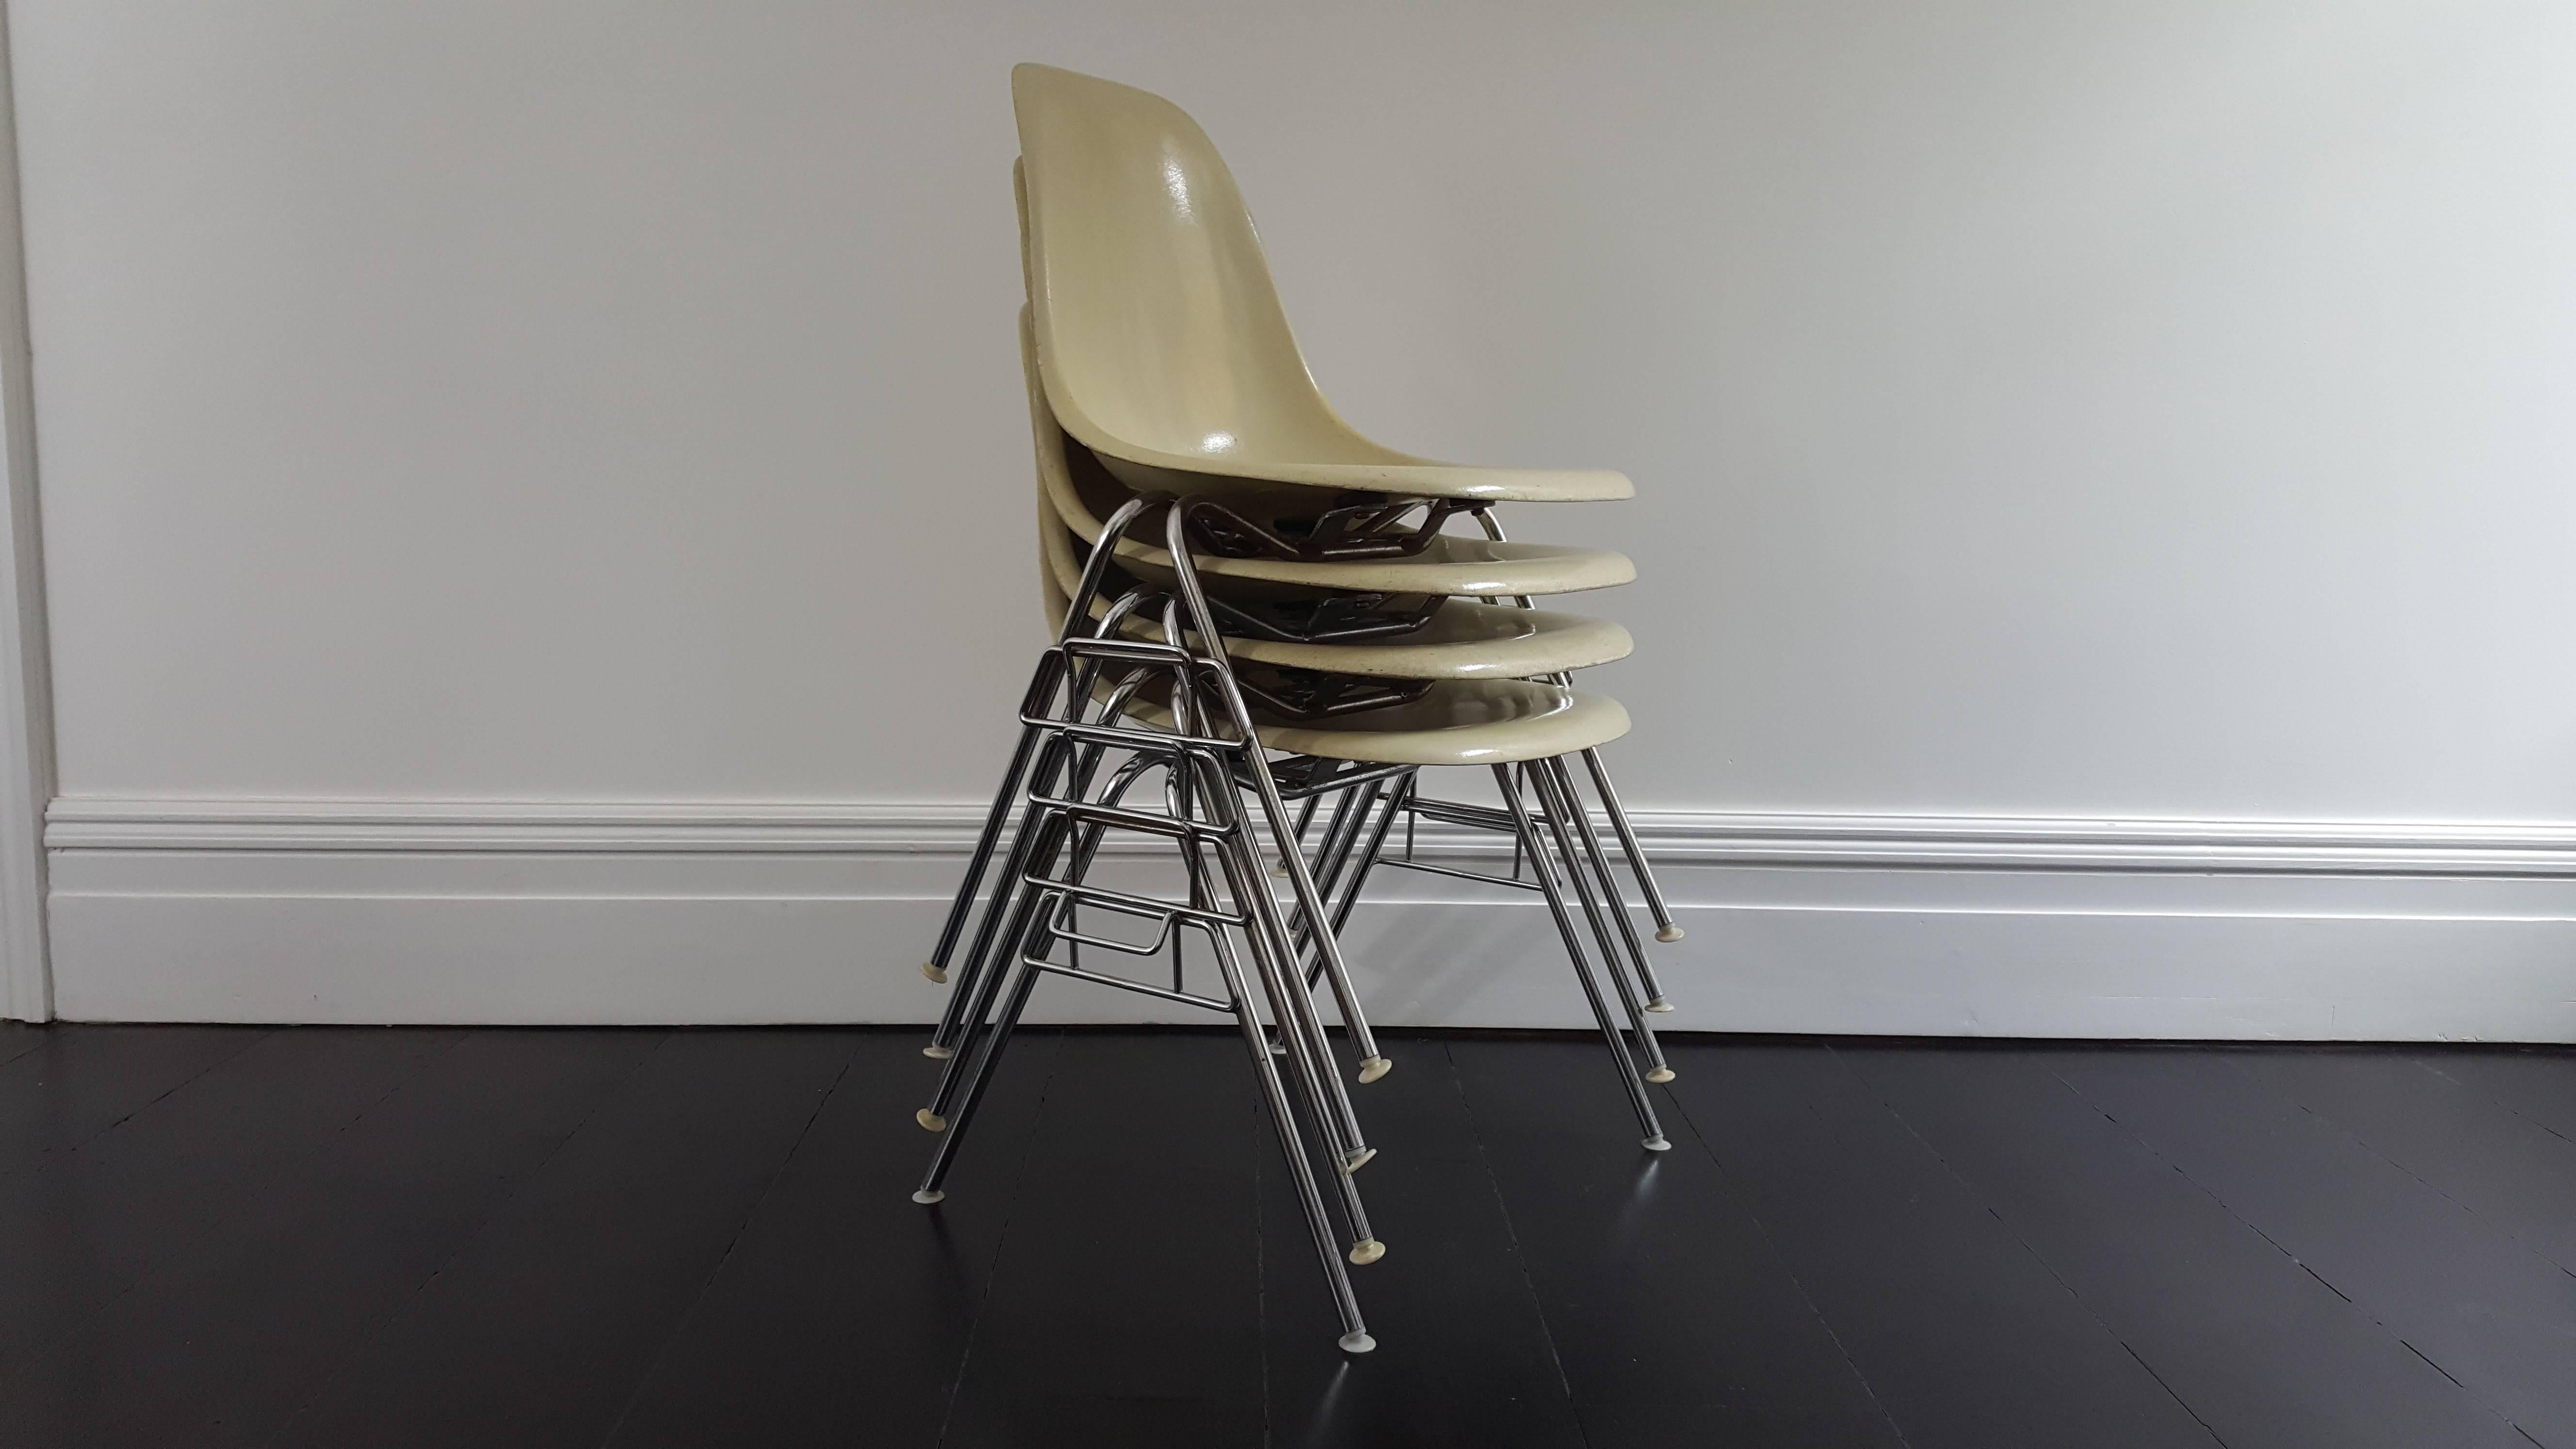 An iconic set of four parchment coloured fibreglass Charles and Ray Eames designed Herman Miller early Fehlbaum production DSX stacking chairs on chromed steel bases. 

Charles Ormond Eames, Jr, (June 17, 1907–August 21, 1978) was an American